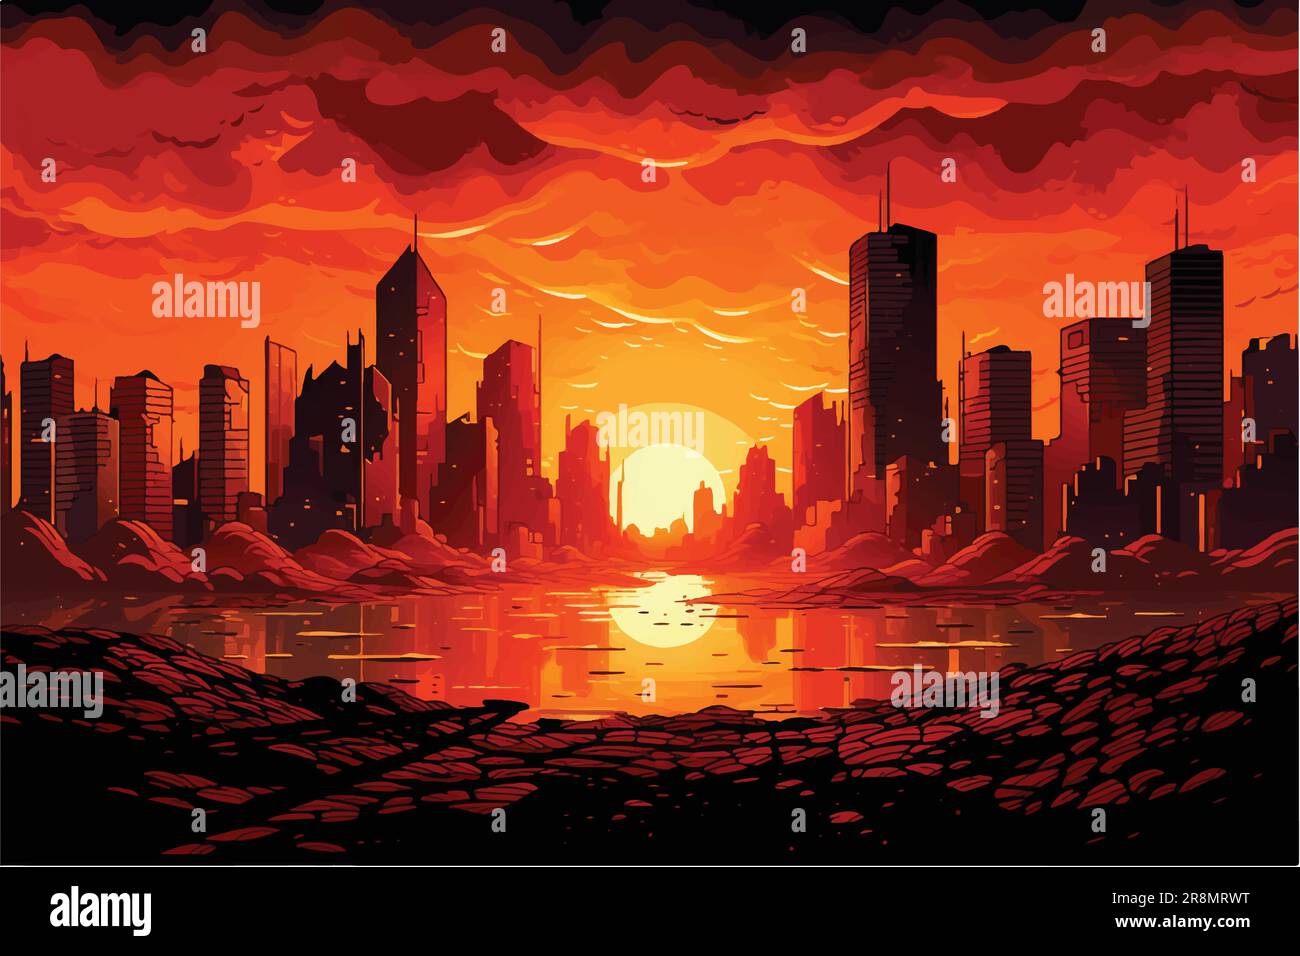 cartoon vector illustration of Searing urban horizon, Cityscape engulfed in red-hot atmospheric heat Stock Vector